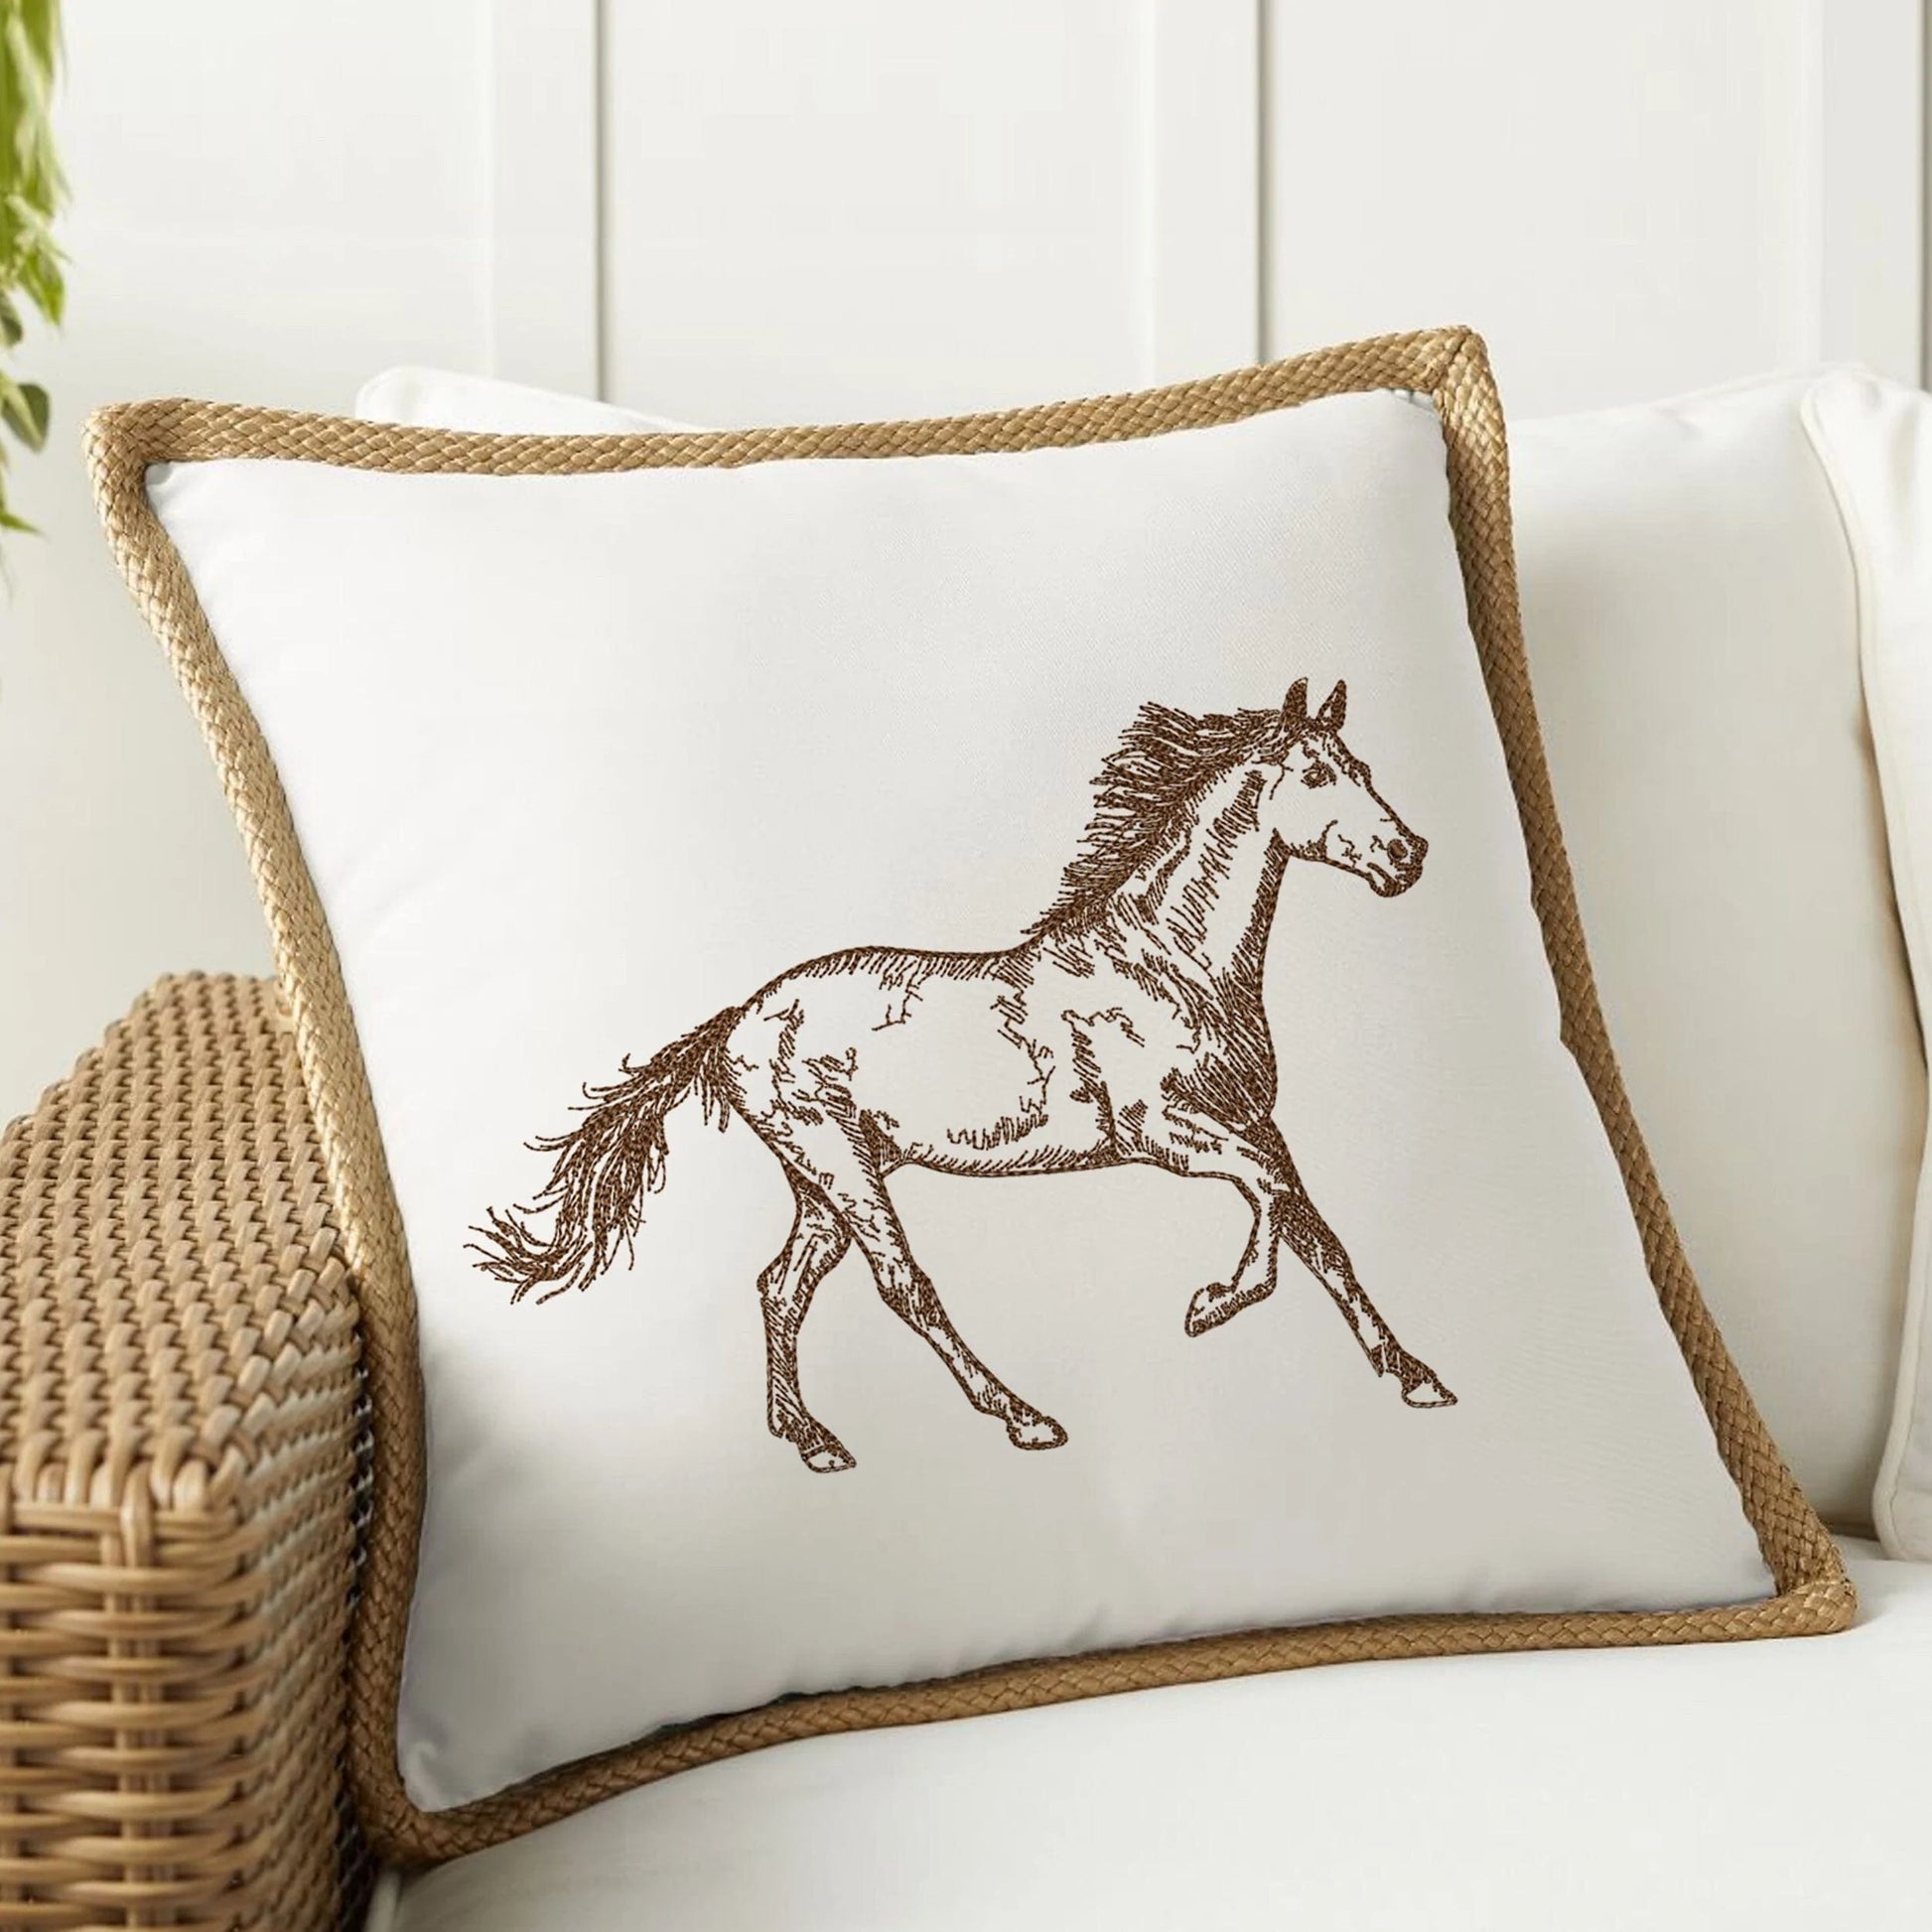 Horse Machine Embroidery Design on a pillow